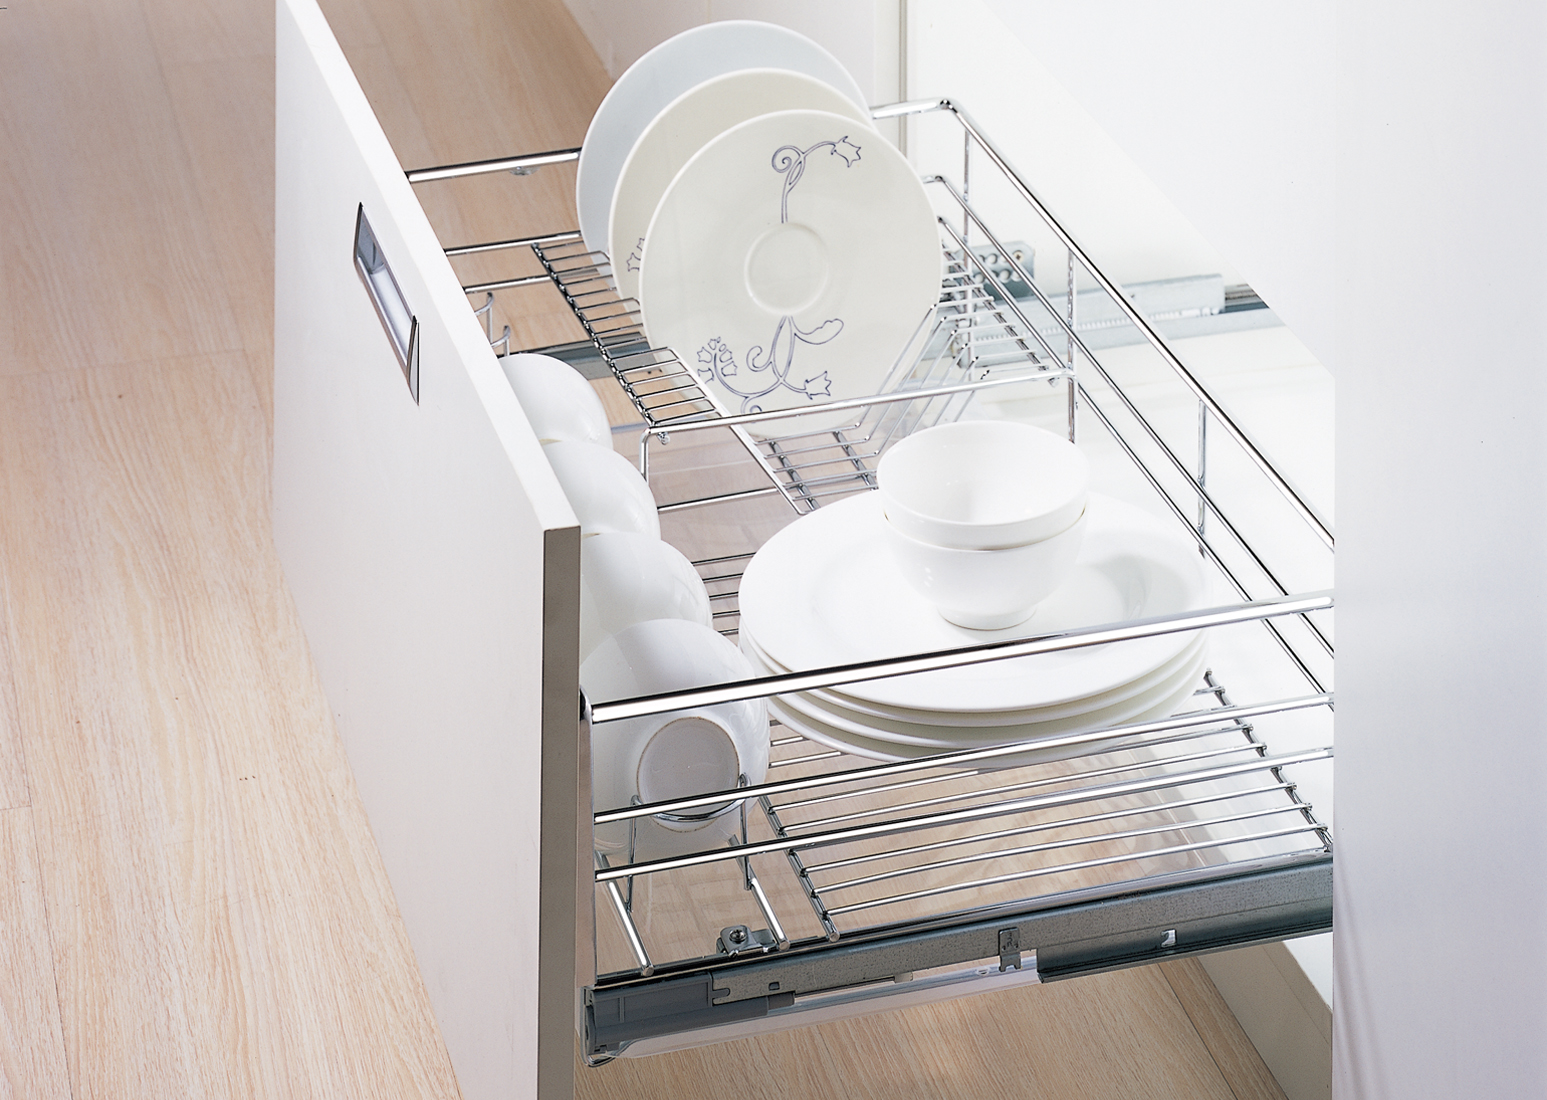 Cabinet pull out baskets with soft-closing for kitchen